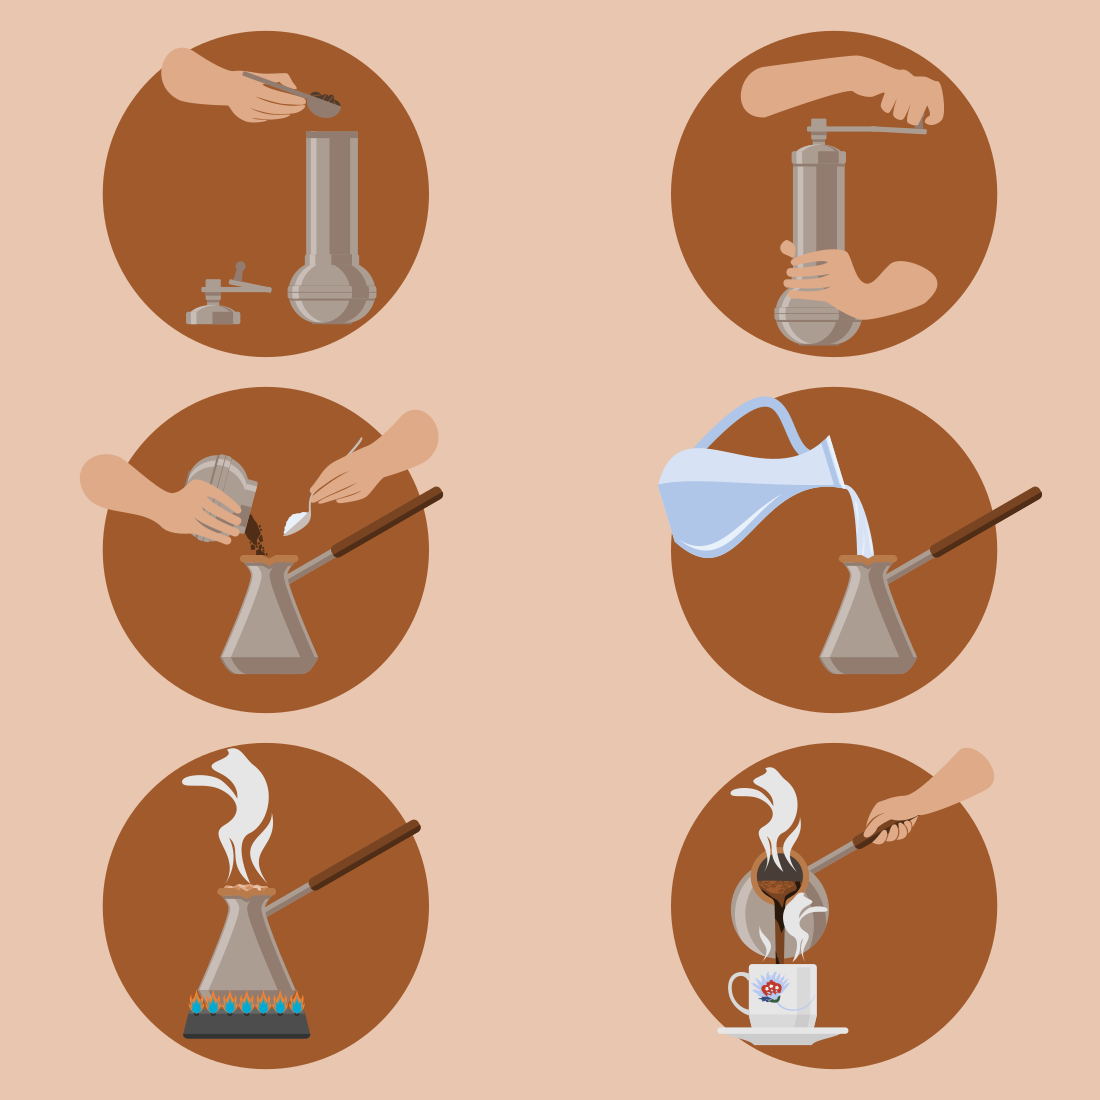 Turkish Coffee Instruction Vector Illustration Icons Set cover image.